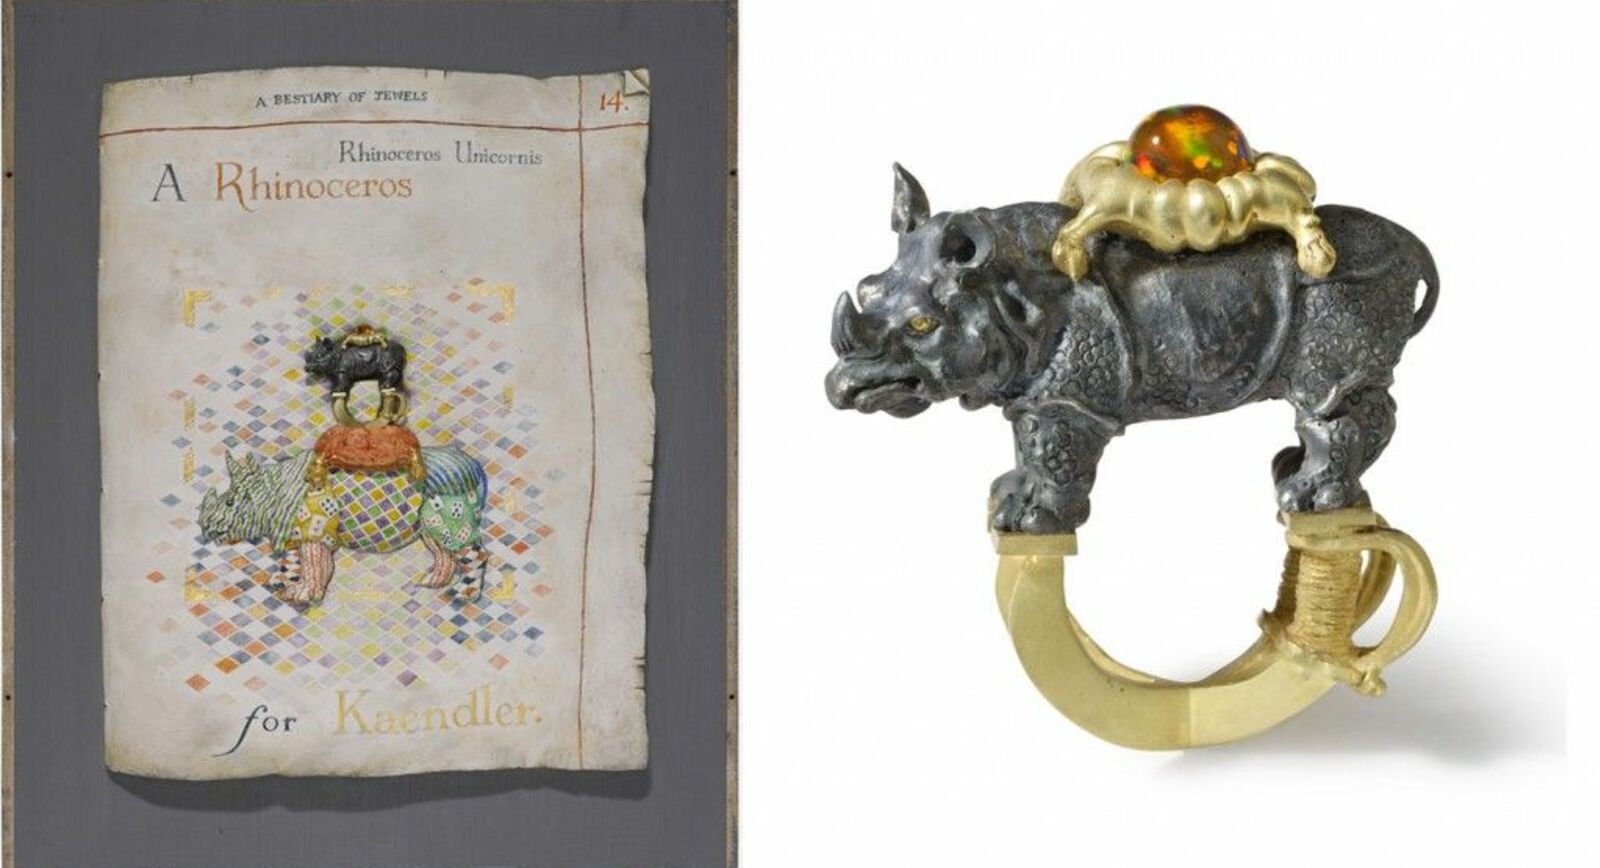 Kevin Coates’ A Bestiary of Jewels’ at the Ashmolean Museum